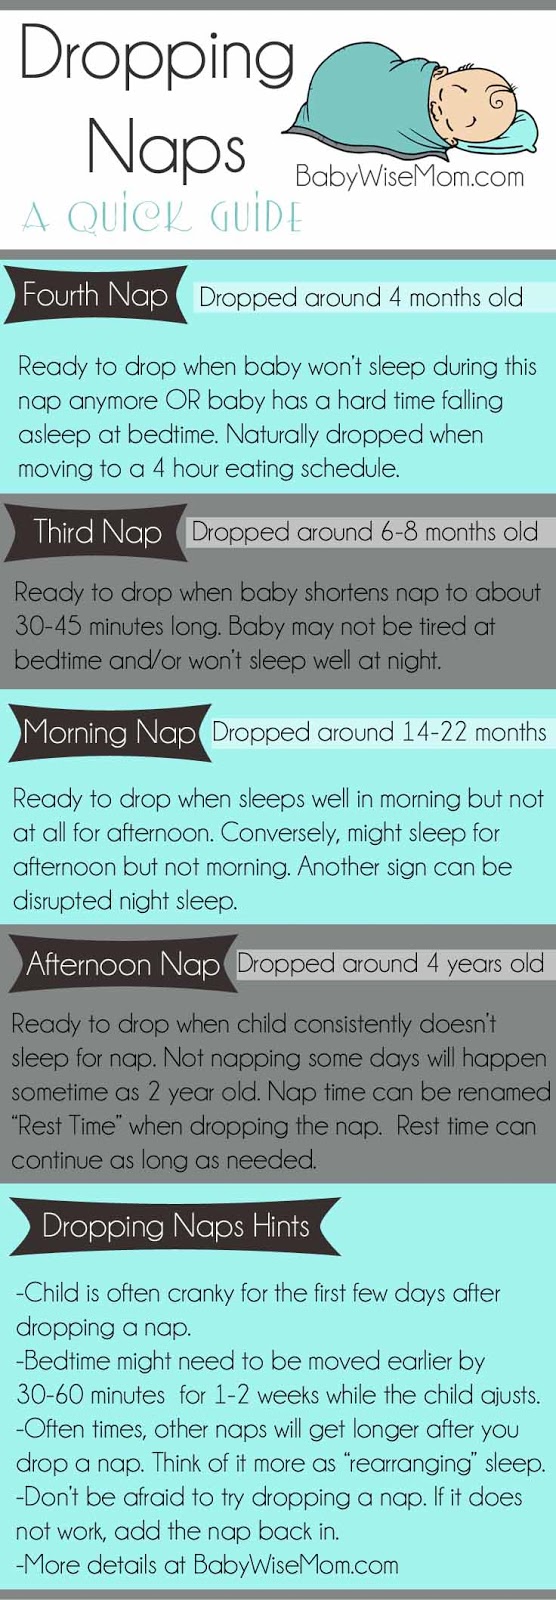 A quick guide for dropping naps